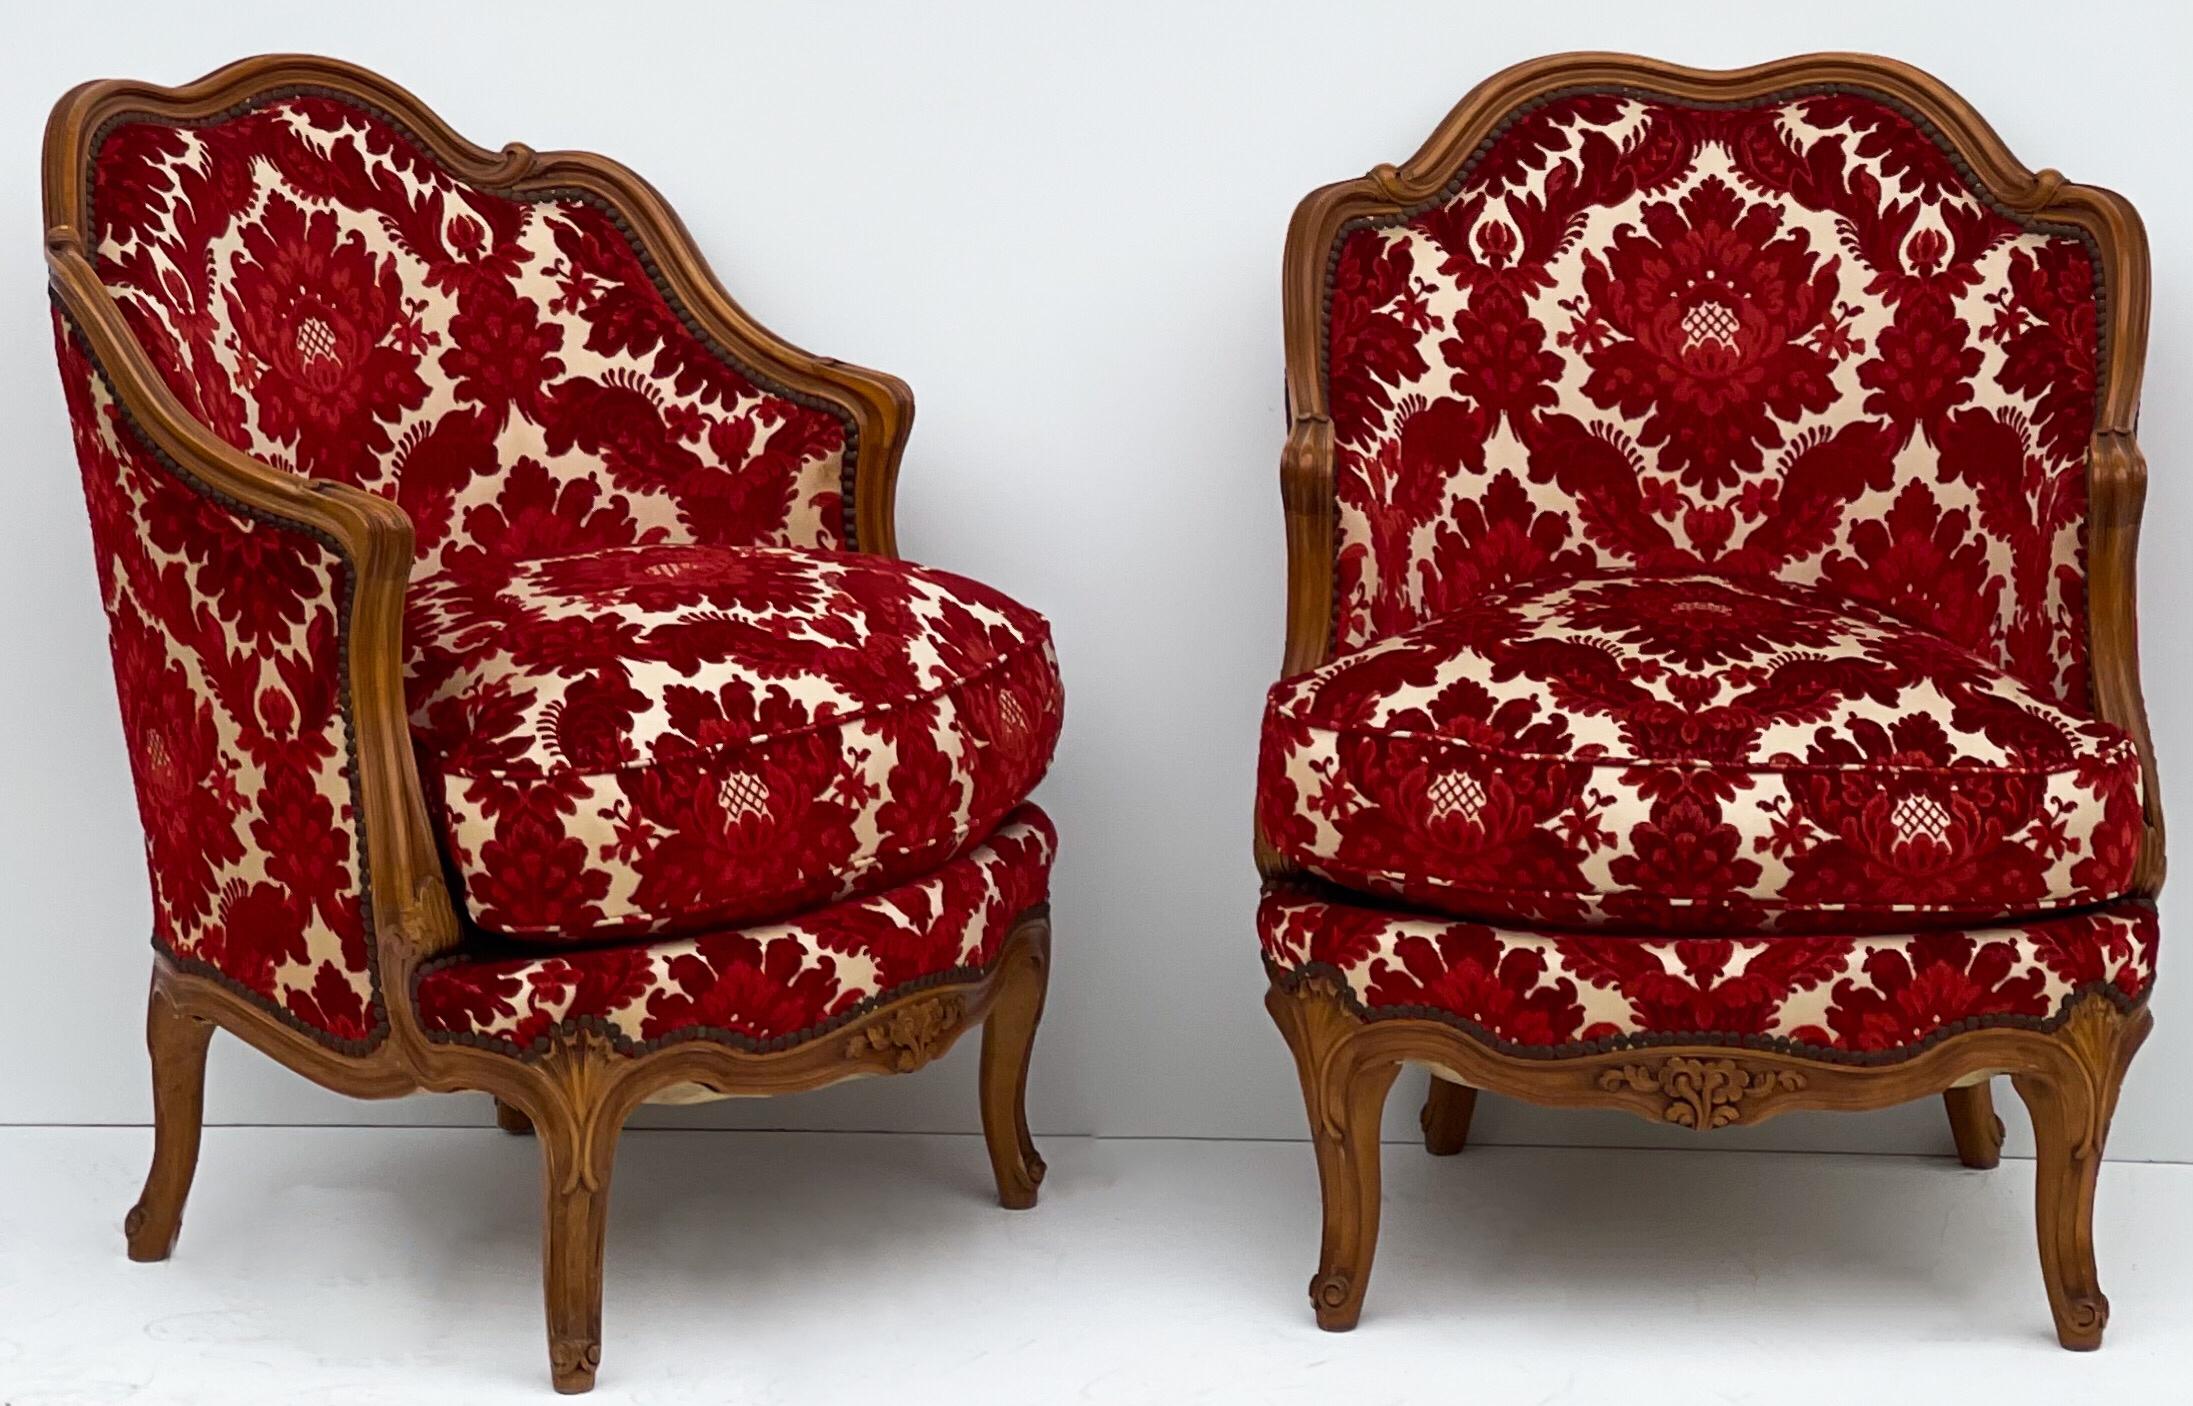 1930s French Carved Fruitwood Chairs in Red Cut Velvet Damask, Pair 6